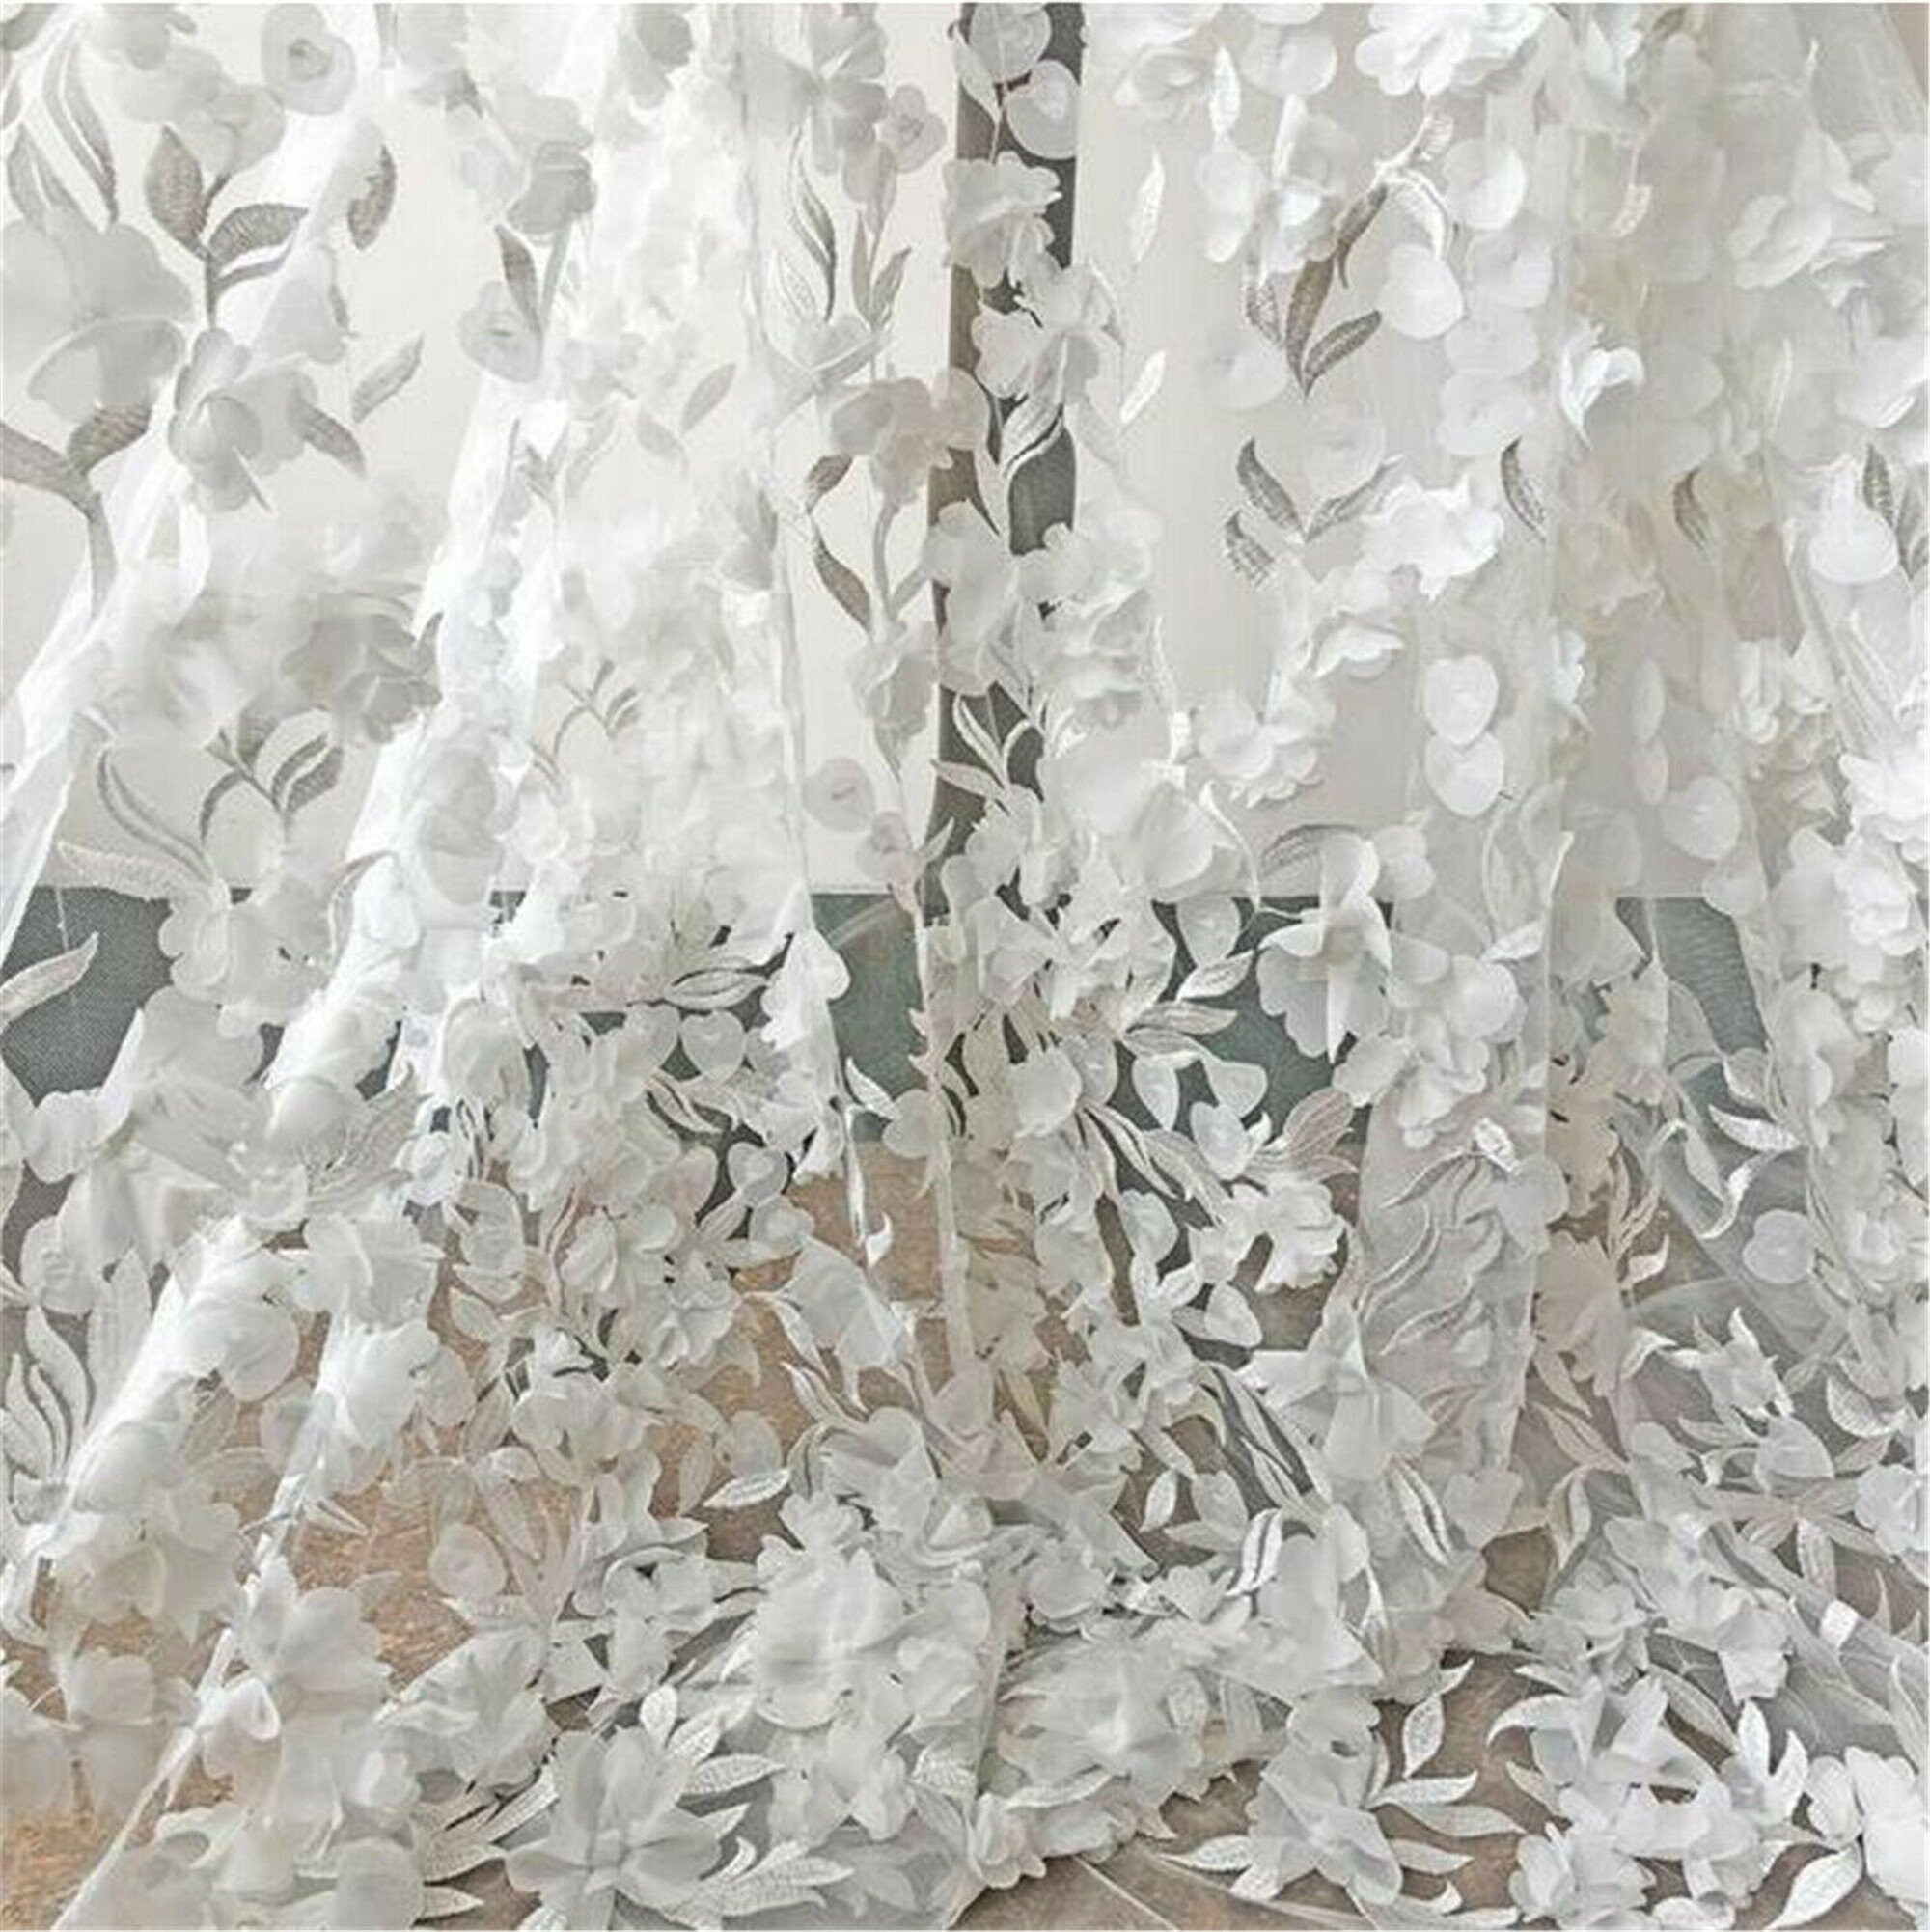 Stunning Blossom Lace Fabric 3D Flower Embroidery Vines Lace by The Yard  for Wedding Dresses Bridal Ballgown 59 inches Width Off-White Color